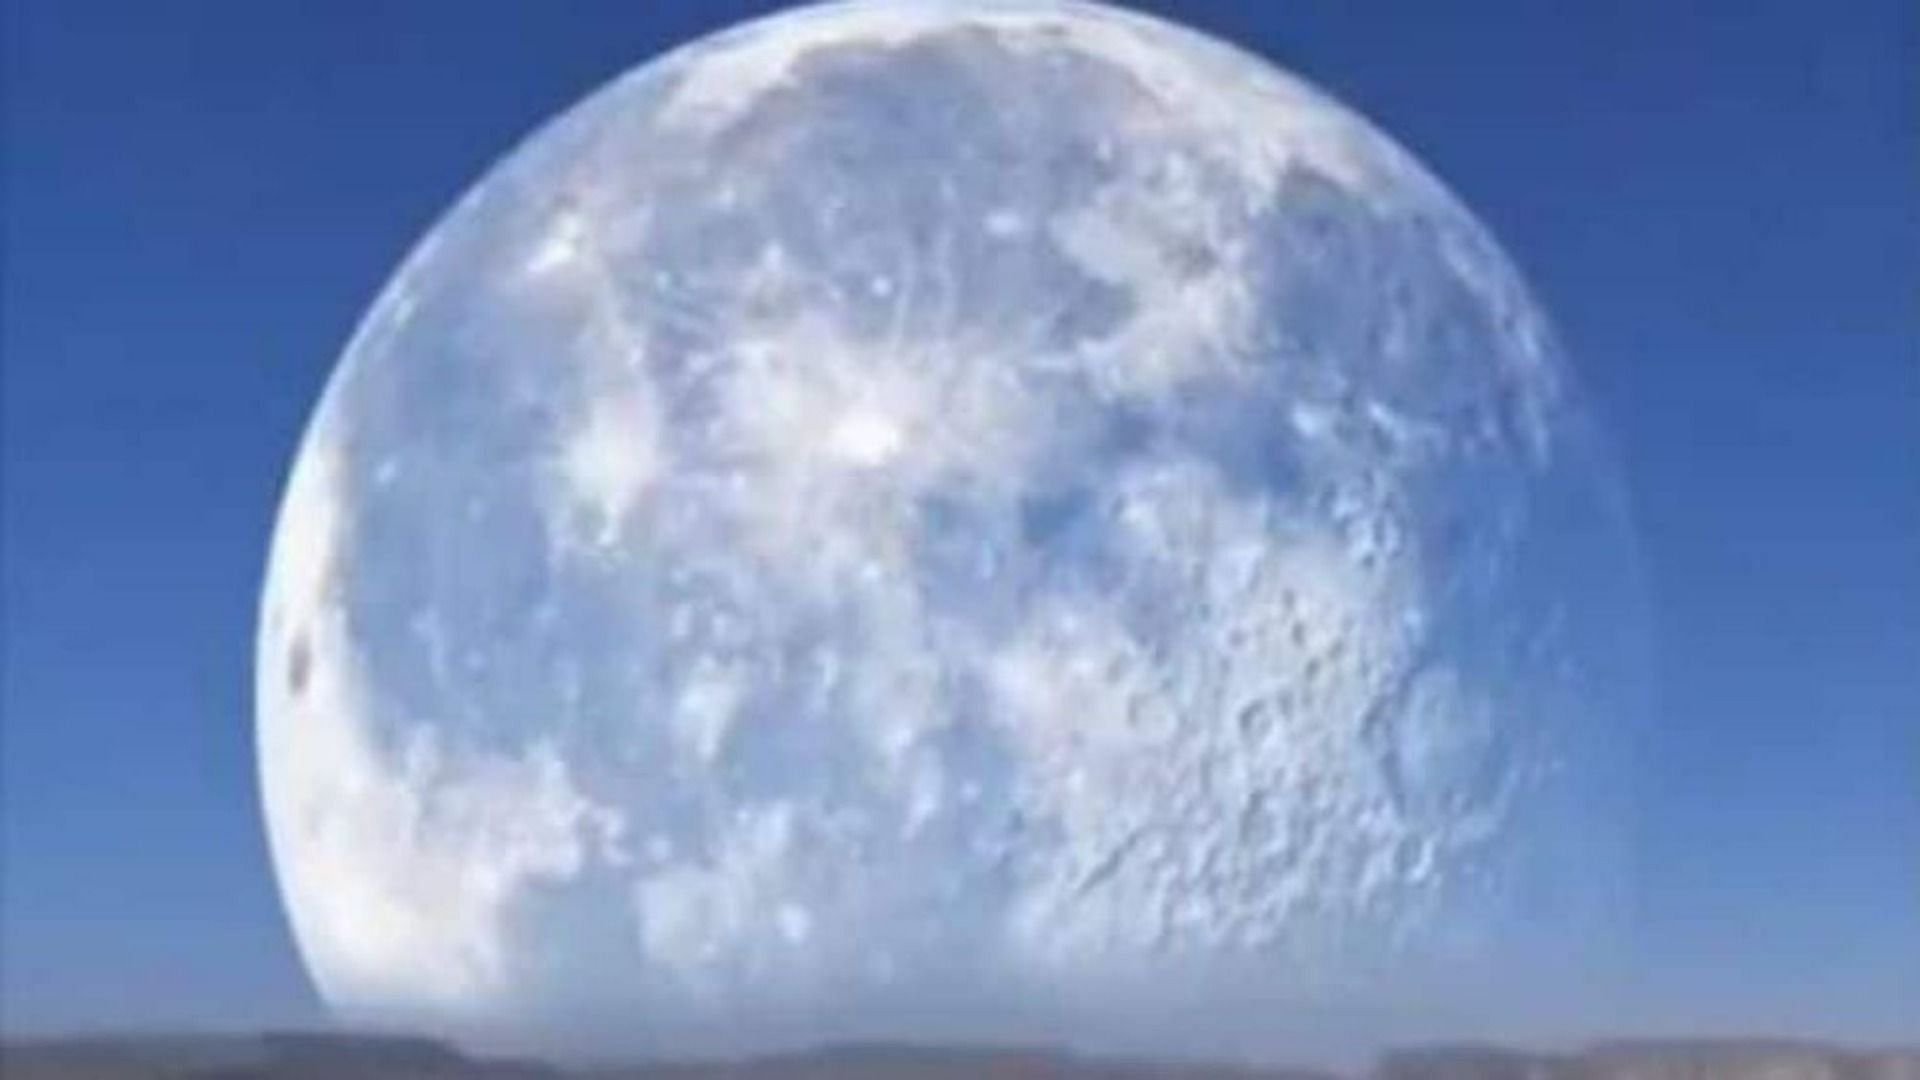 Video of the moon eclipsing the sun at the North Pole goes viral on social media (Image via BeachDog15/Twitter)